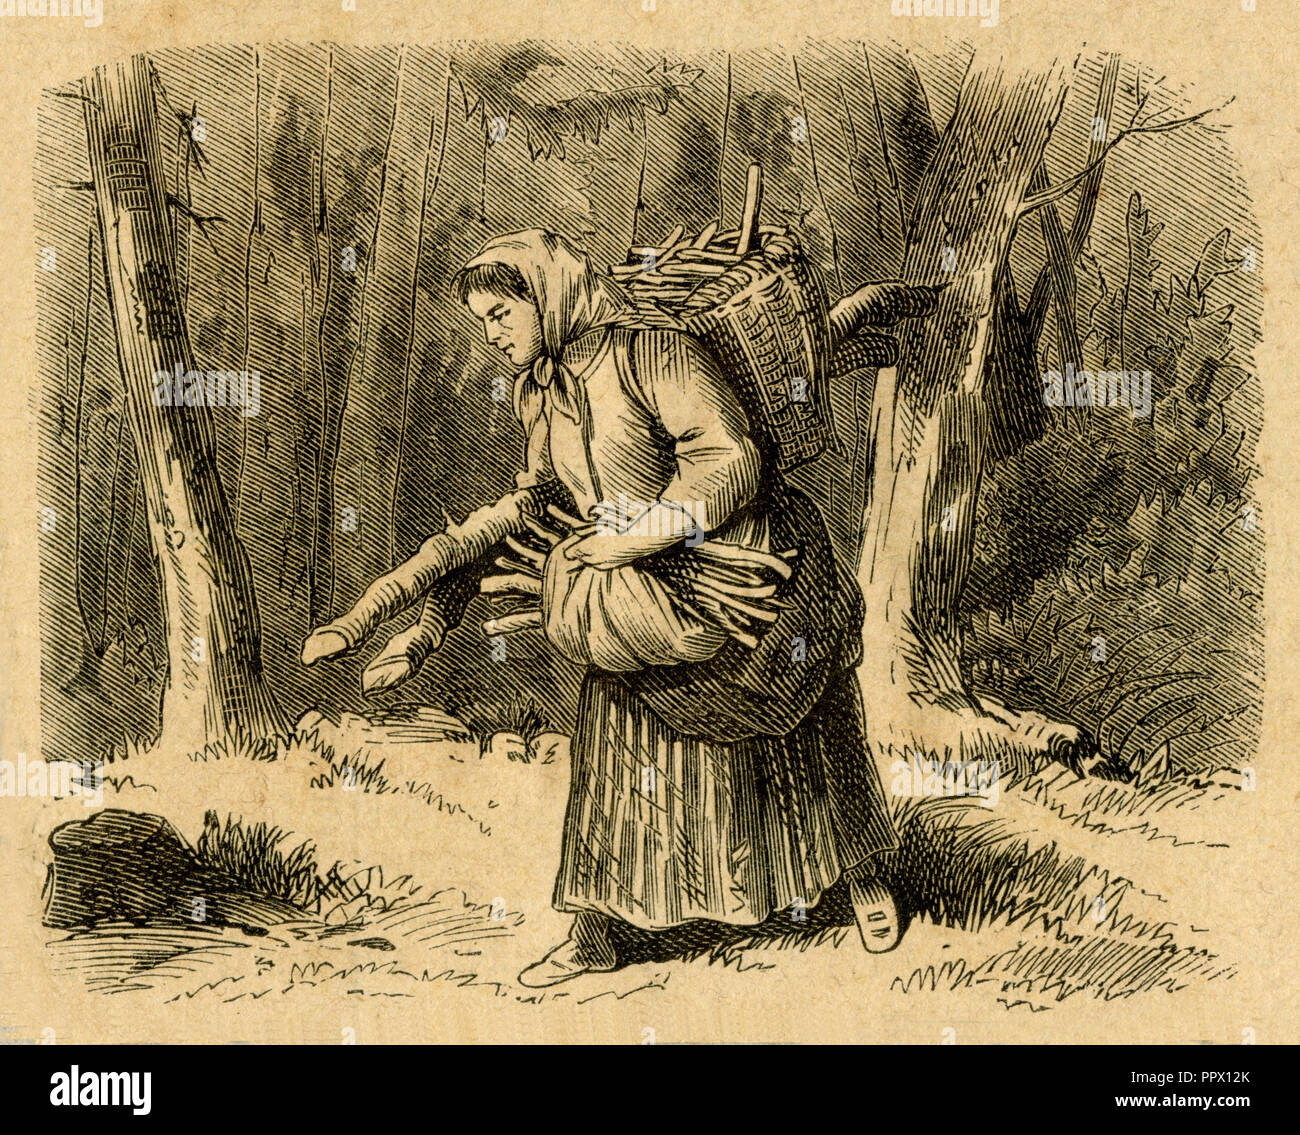 Woman picking up firewood in the forest, Stock Photo